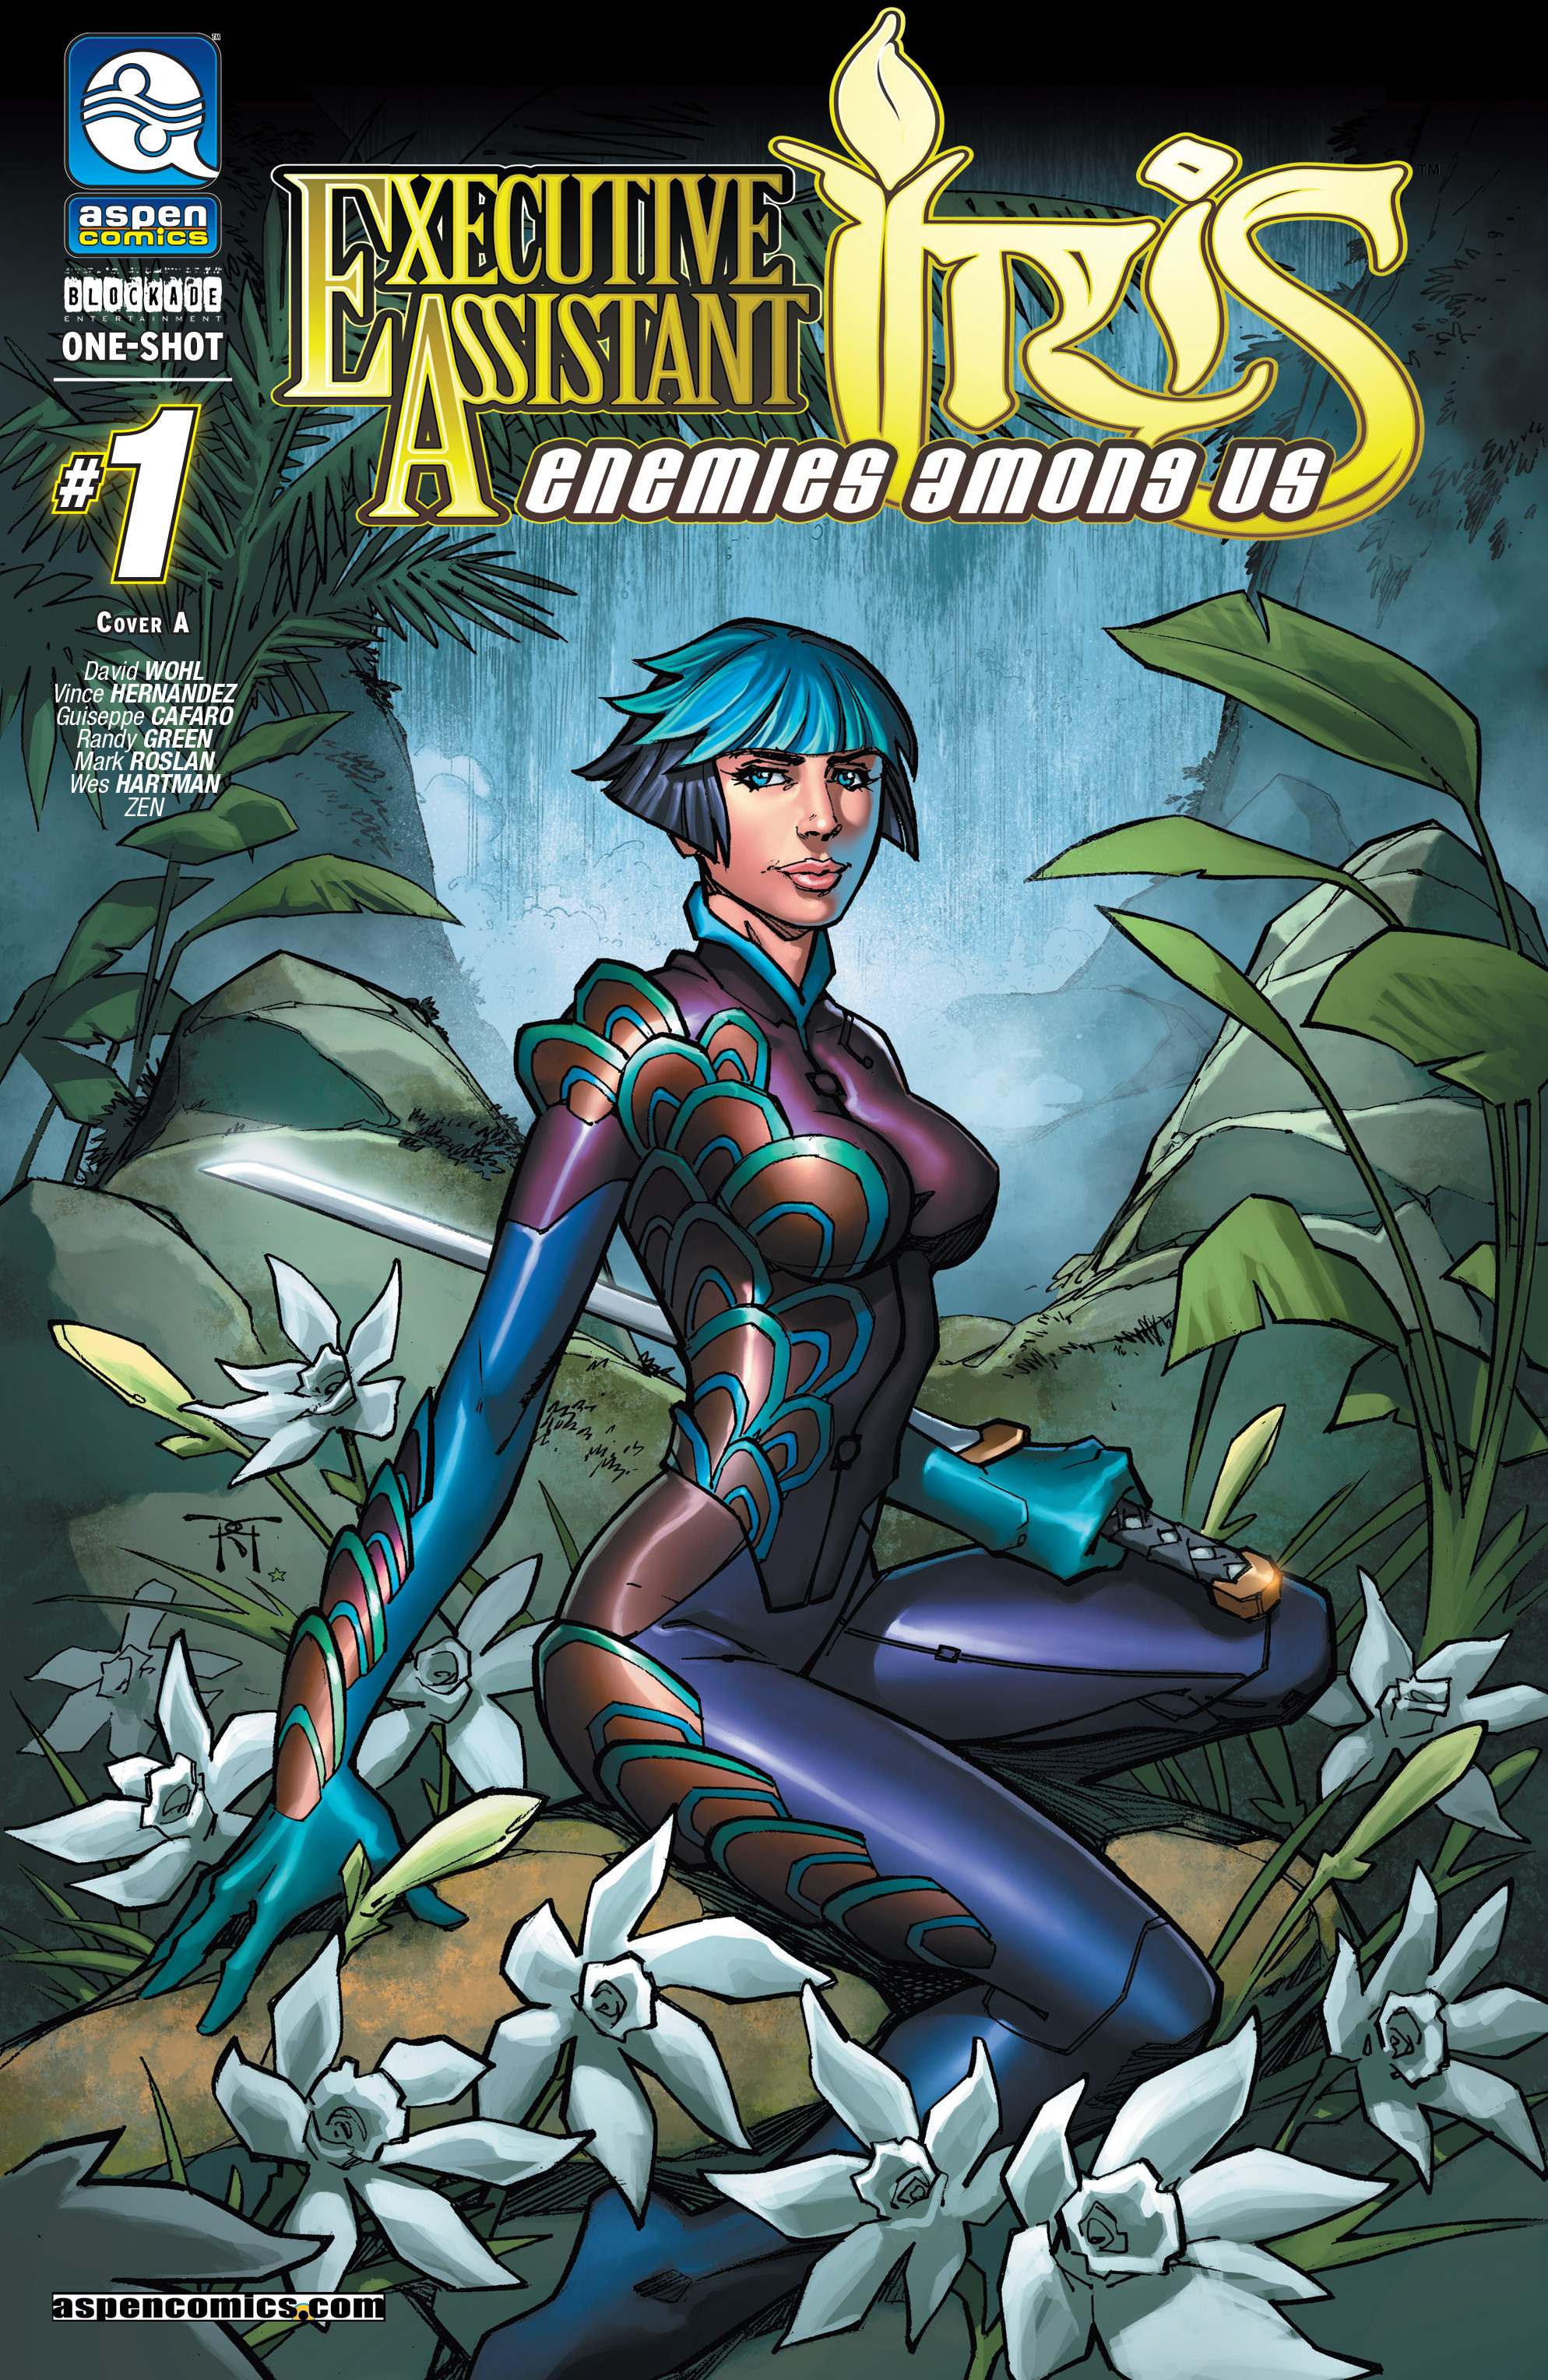 Read online Executive Assistant: Iris - Enemies Among Us comic -  Issue # Full - 1